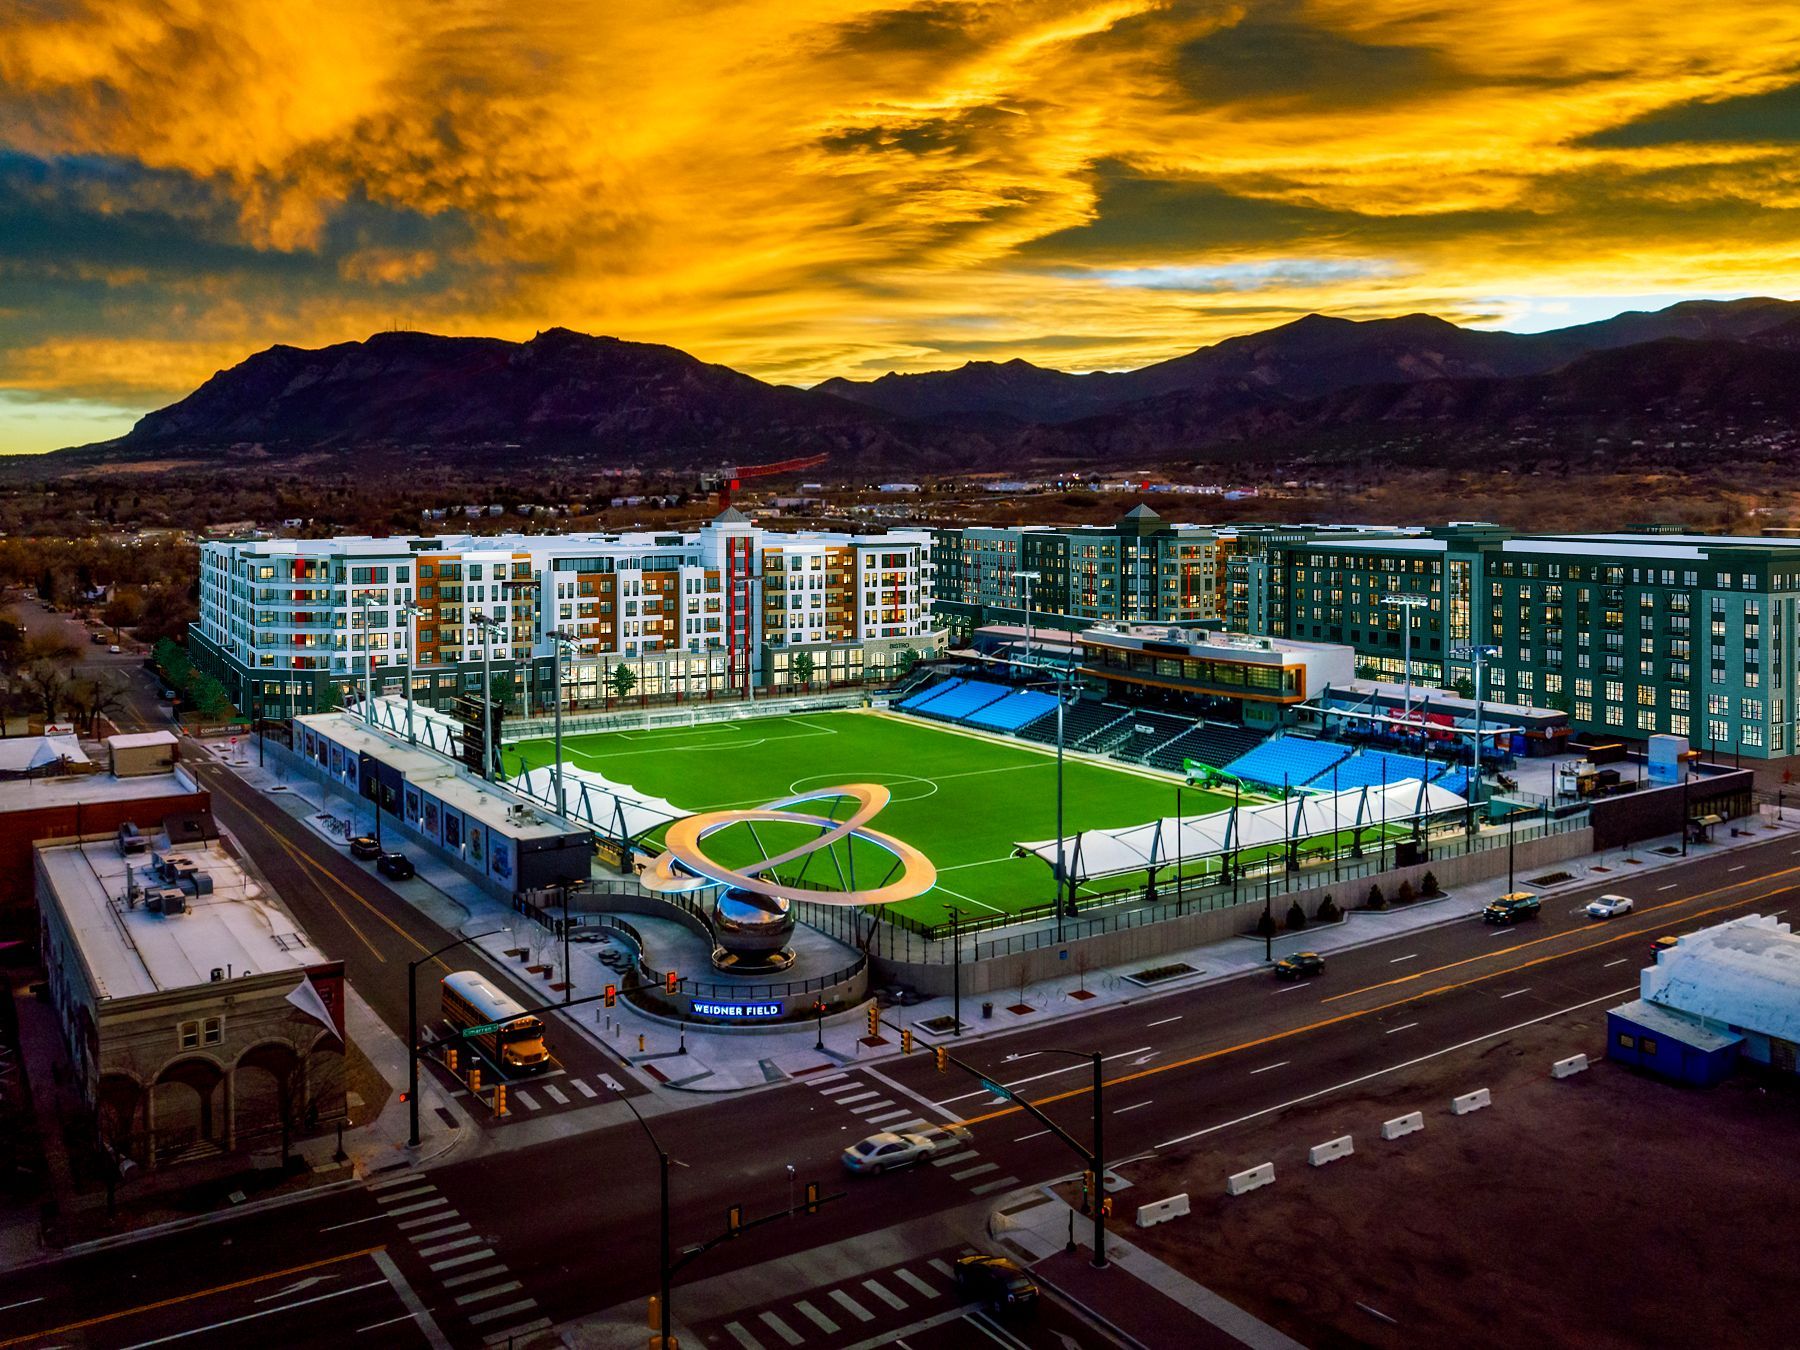 An aerial view of a baseball stadium with mountains in the background at sunset.